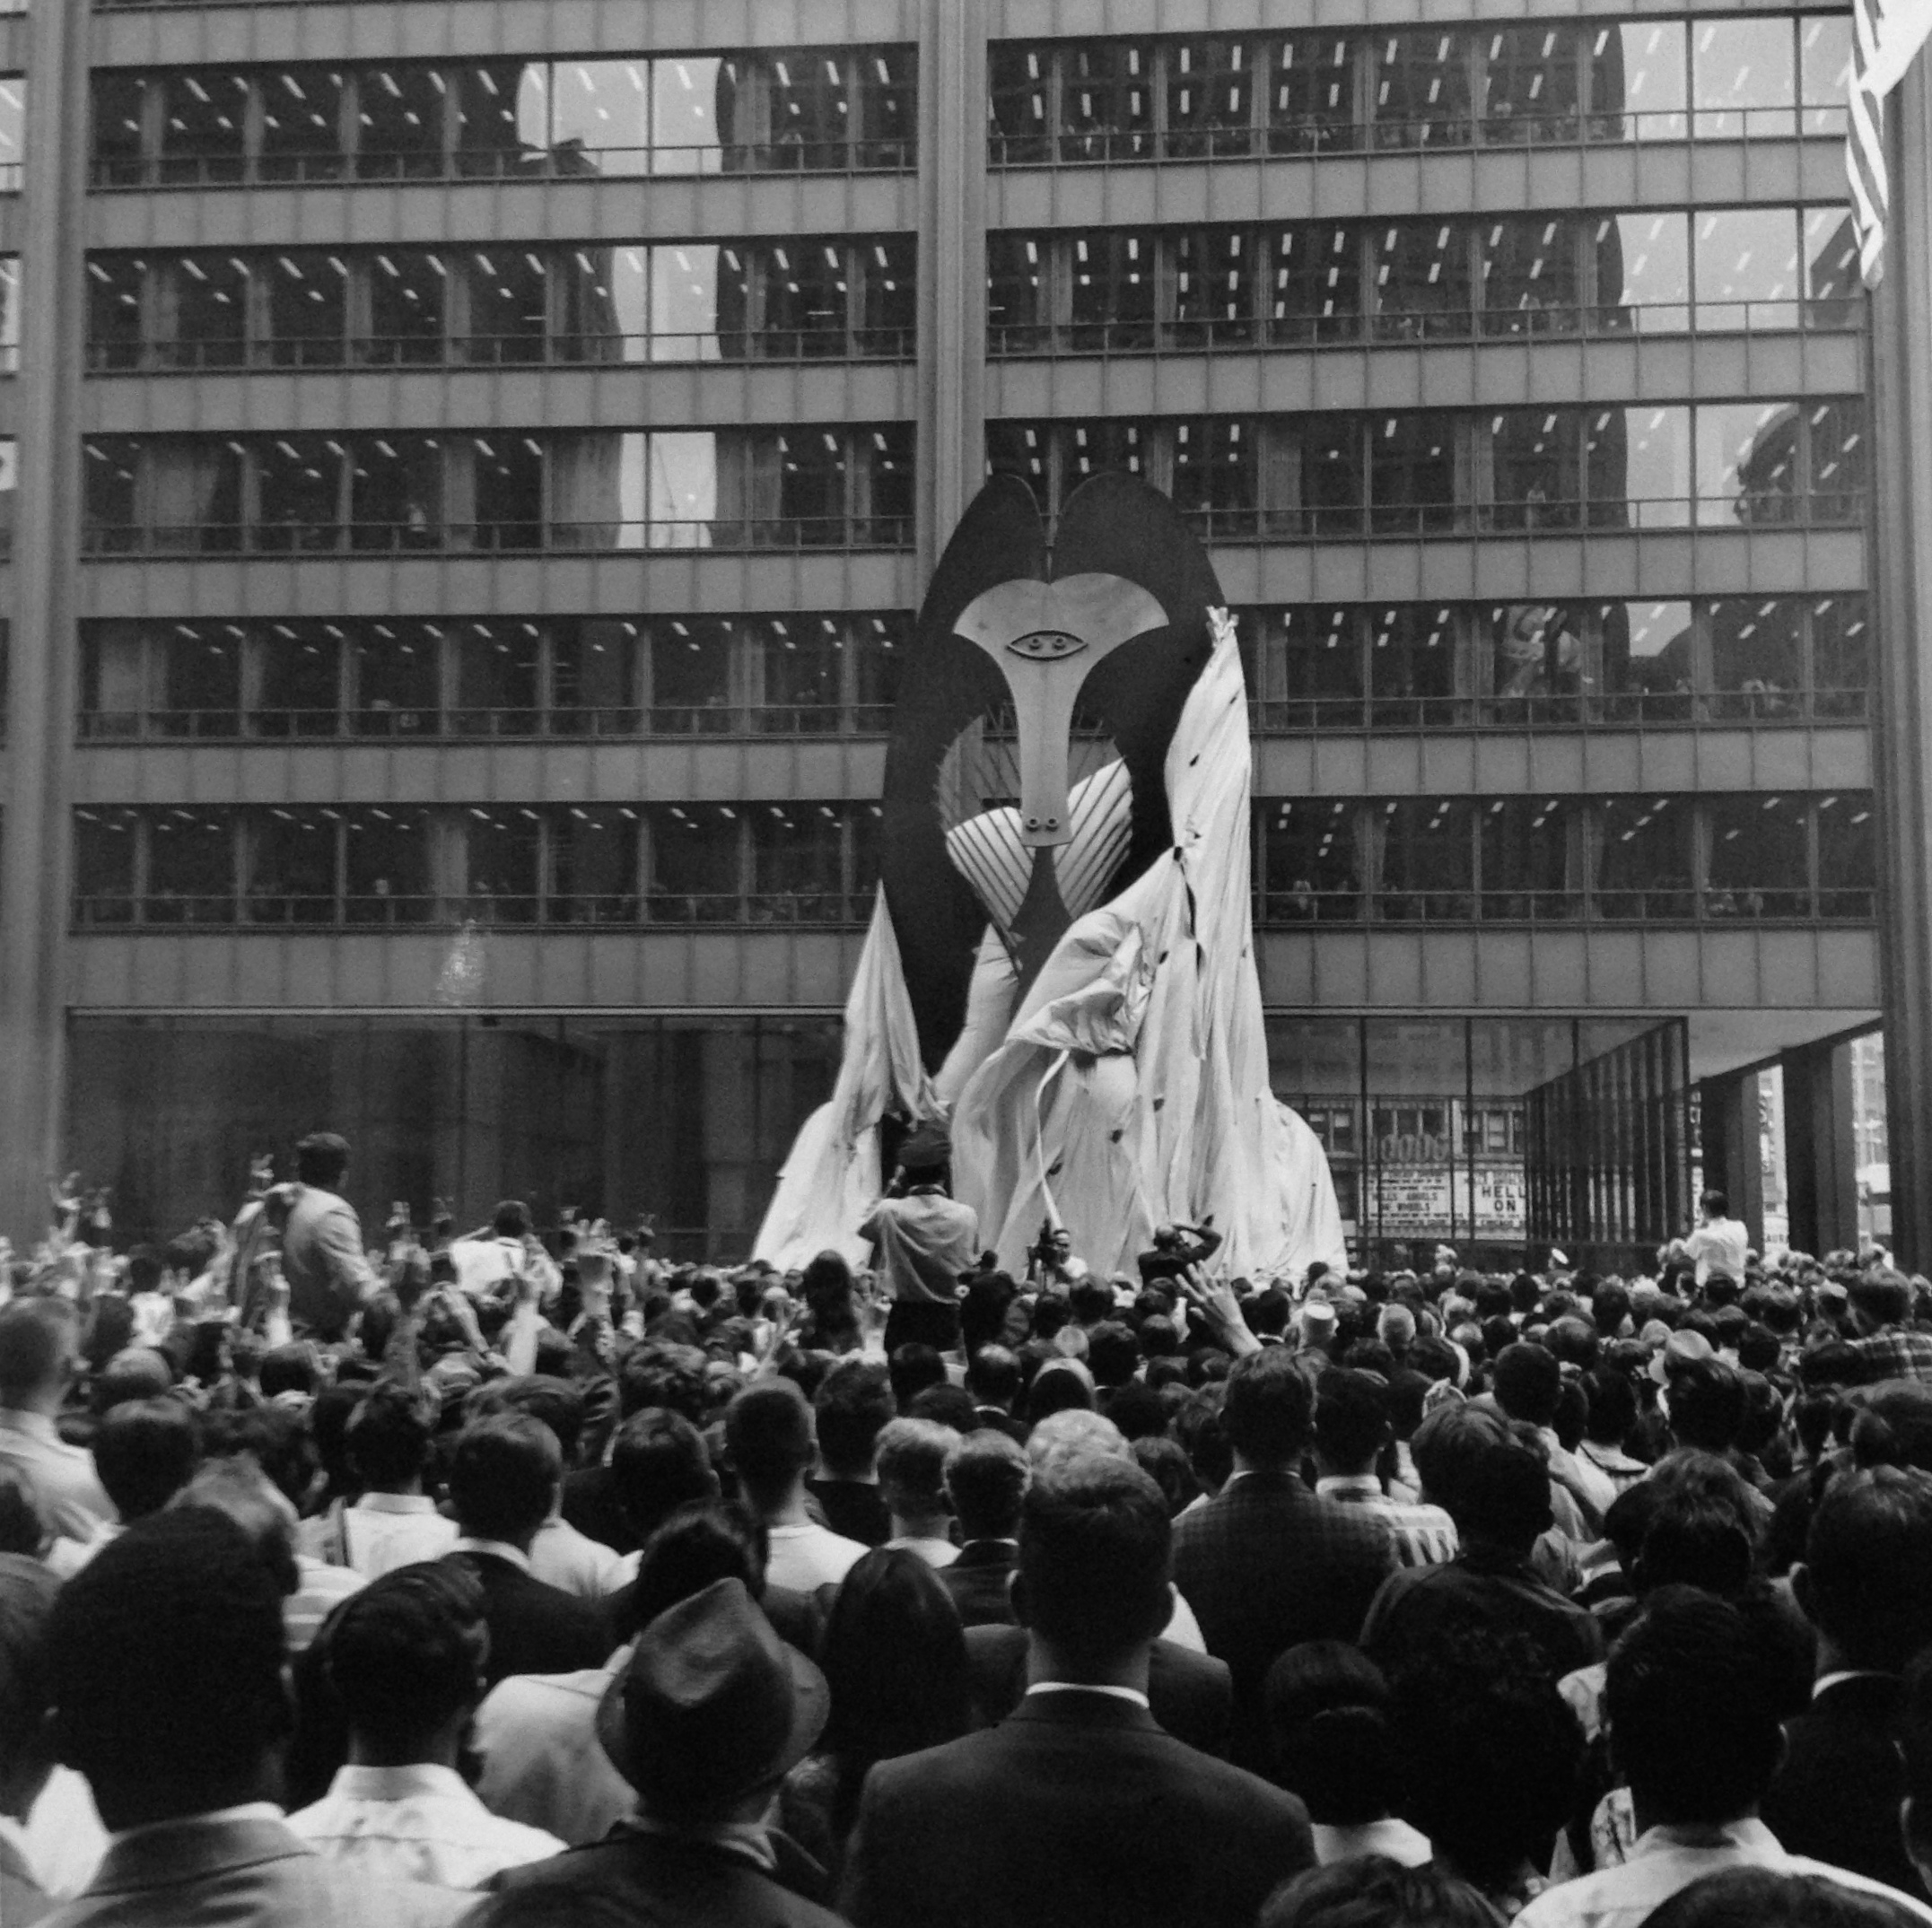   Unveiling of Picasso Sculpture,&nbsp;Daley Plaza,  August 15, 1967  Signed Silver Gelatin Print  8x10" &nbsp;$750 